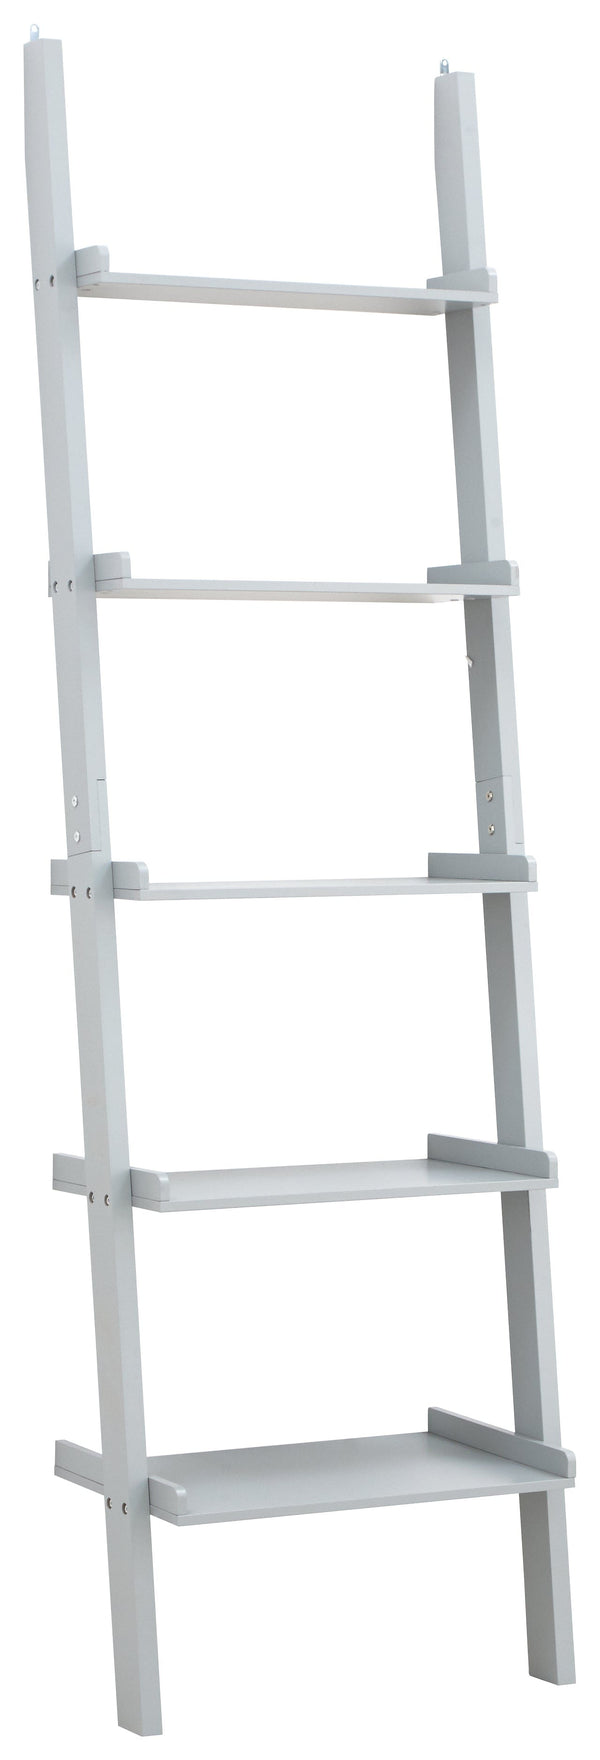 GFW Shelving Unit Ladder Style 5 Tier Wall Rack Grey Bed Kings